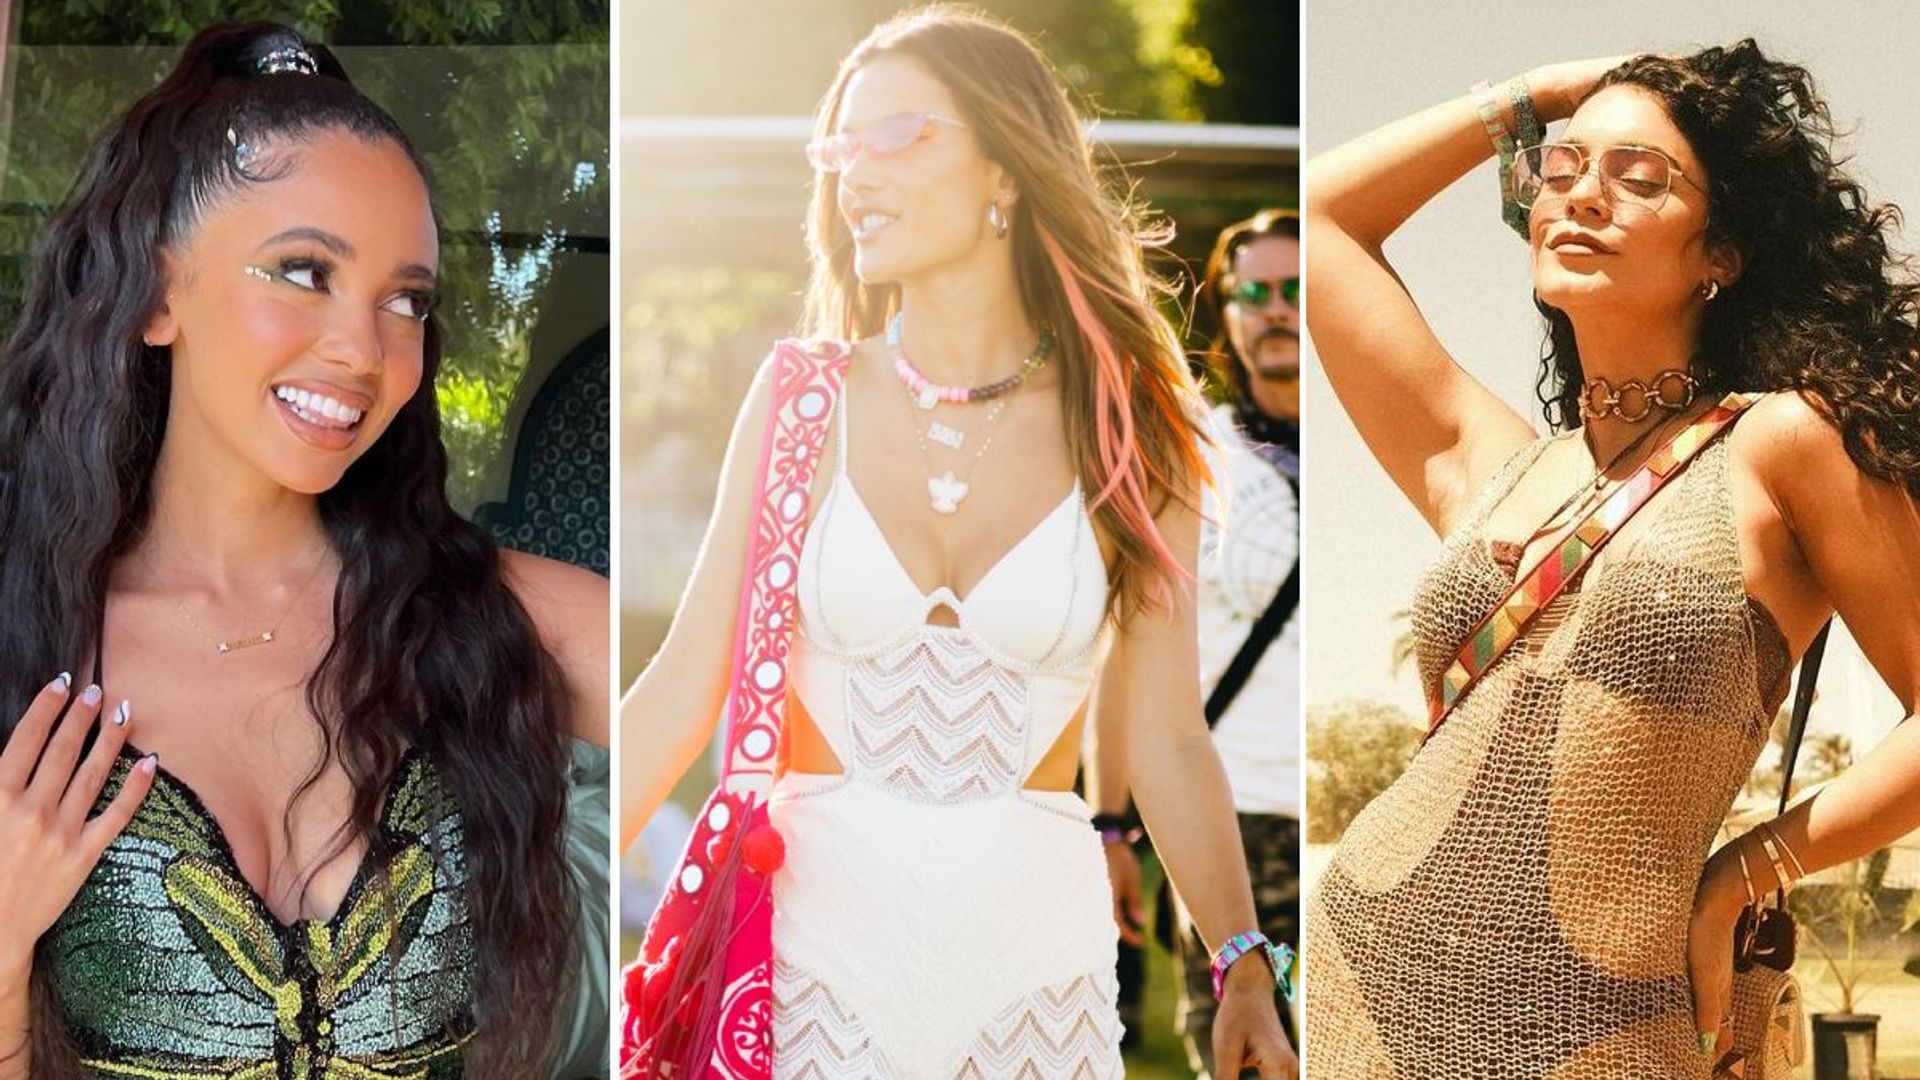 Coachella 2022: All the best looks from Alessandra Ambrosio to Chanel Iman